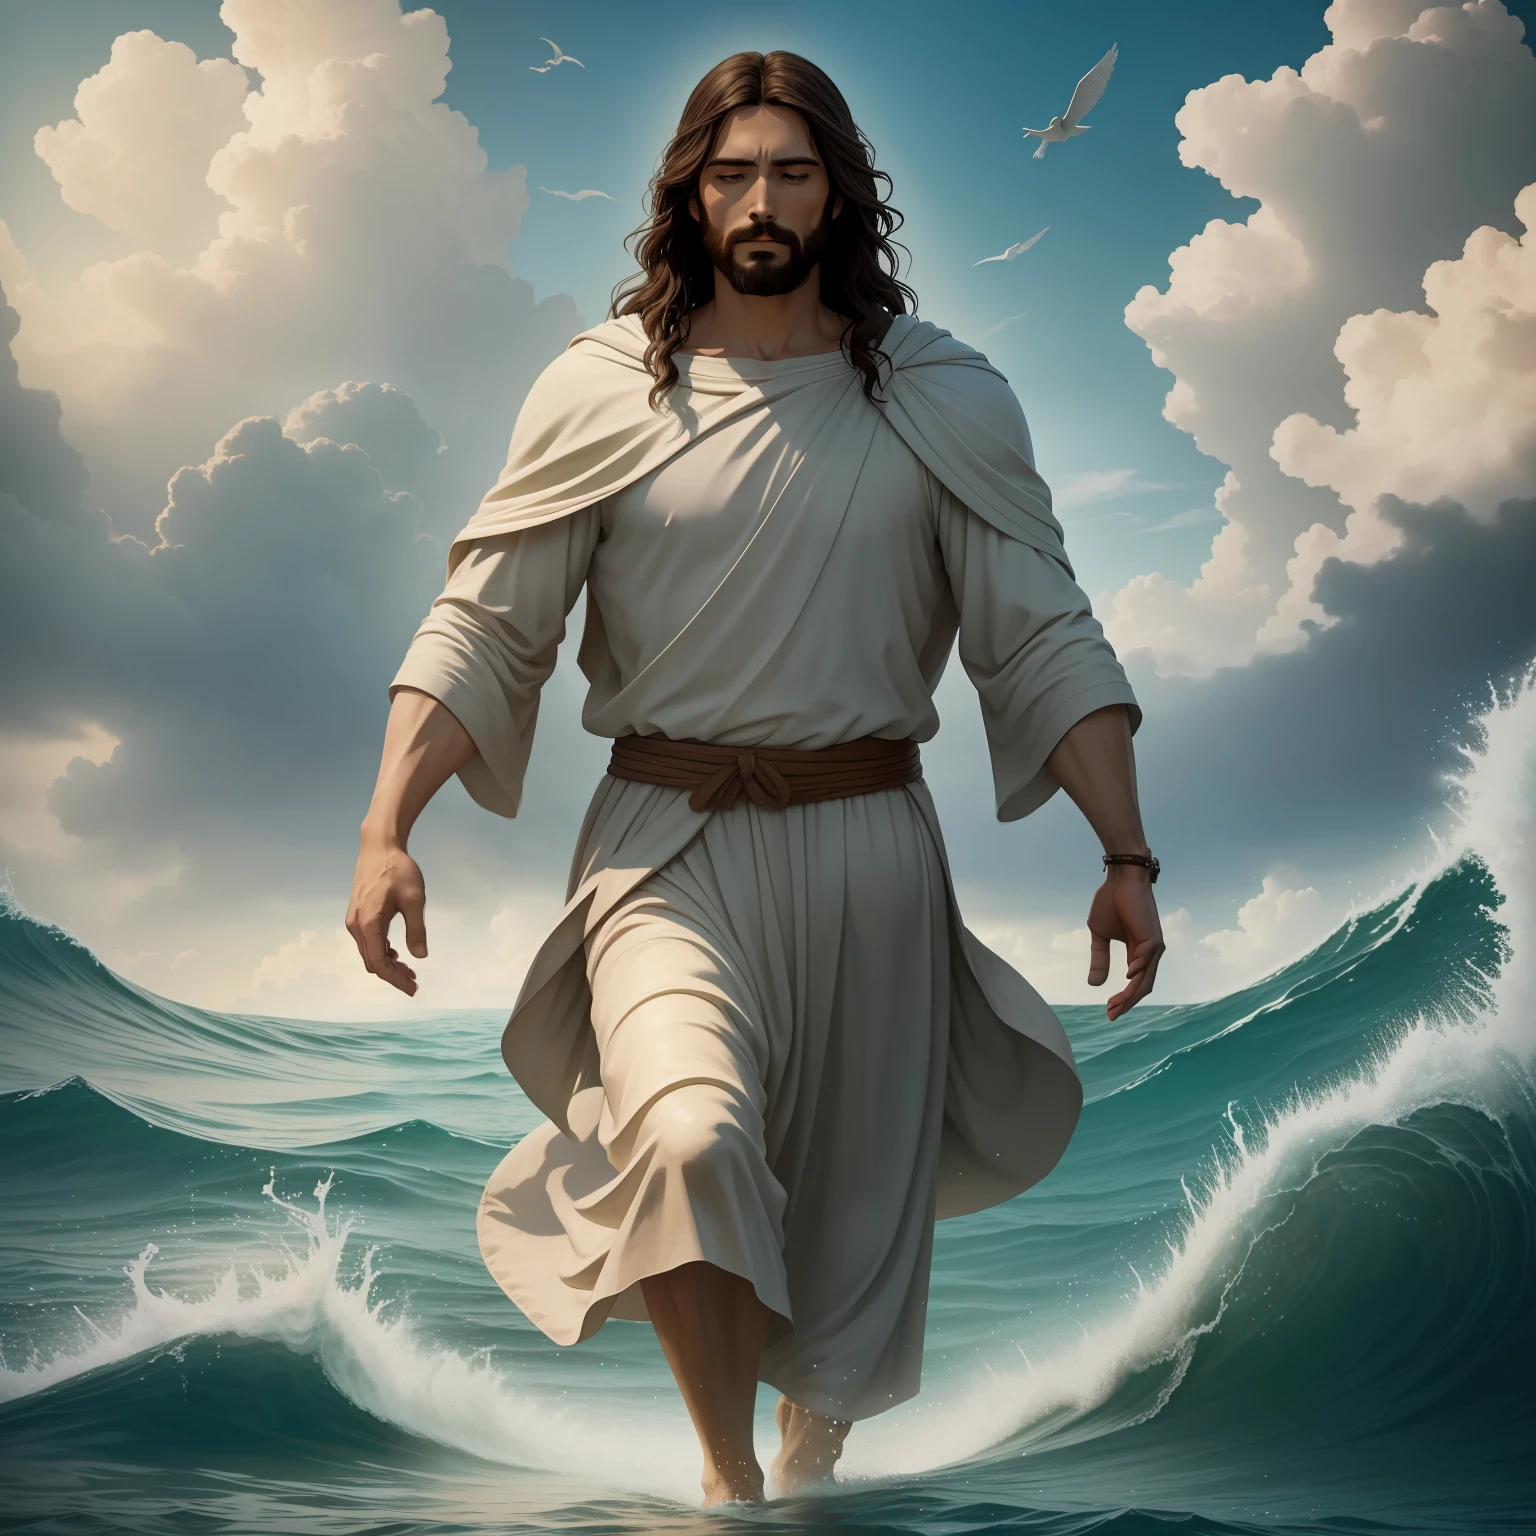 Jesus walking on water with a heaven cloud in the background, Jesus walking on water, biblical illustration, epic biblical representation, forcing him to flee, coming out of the ocean, ! holding in hand!, blessing to help people, disembarking, god of the ocean, beautiful representation, 8k sunny blessings light, realistic,